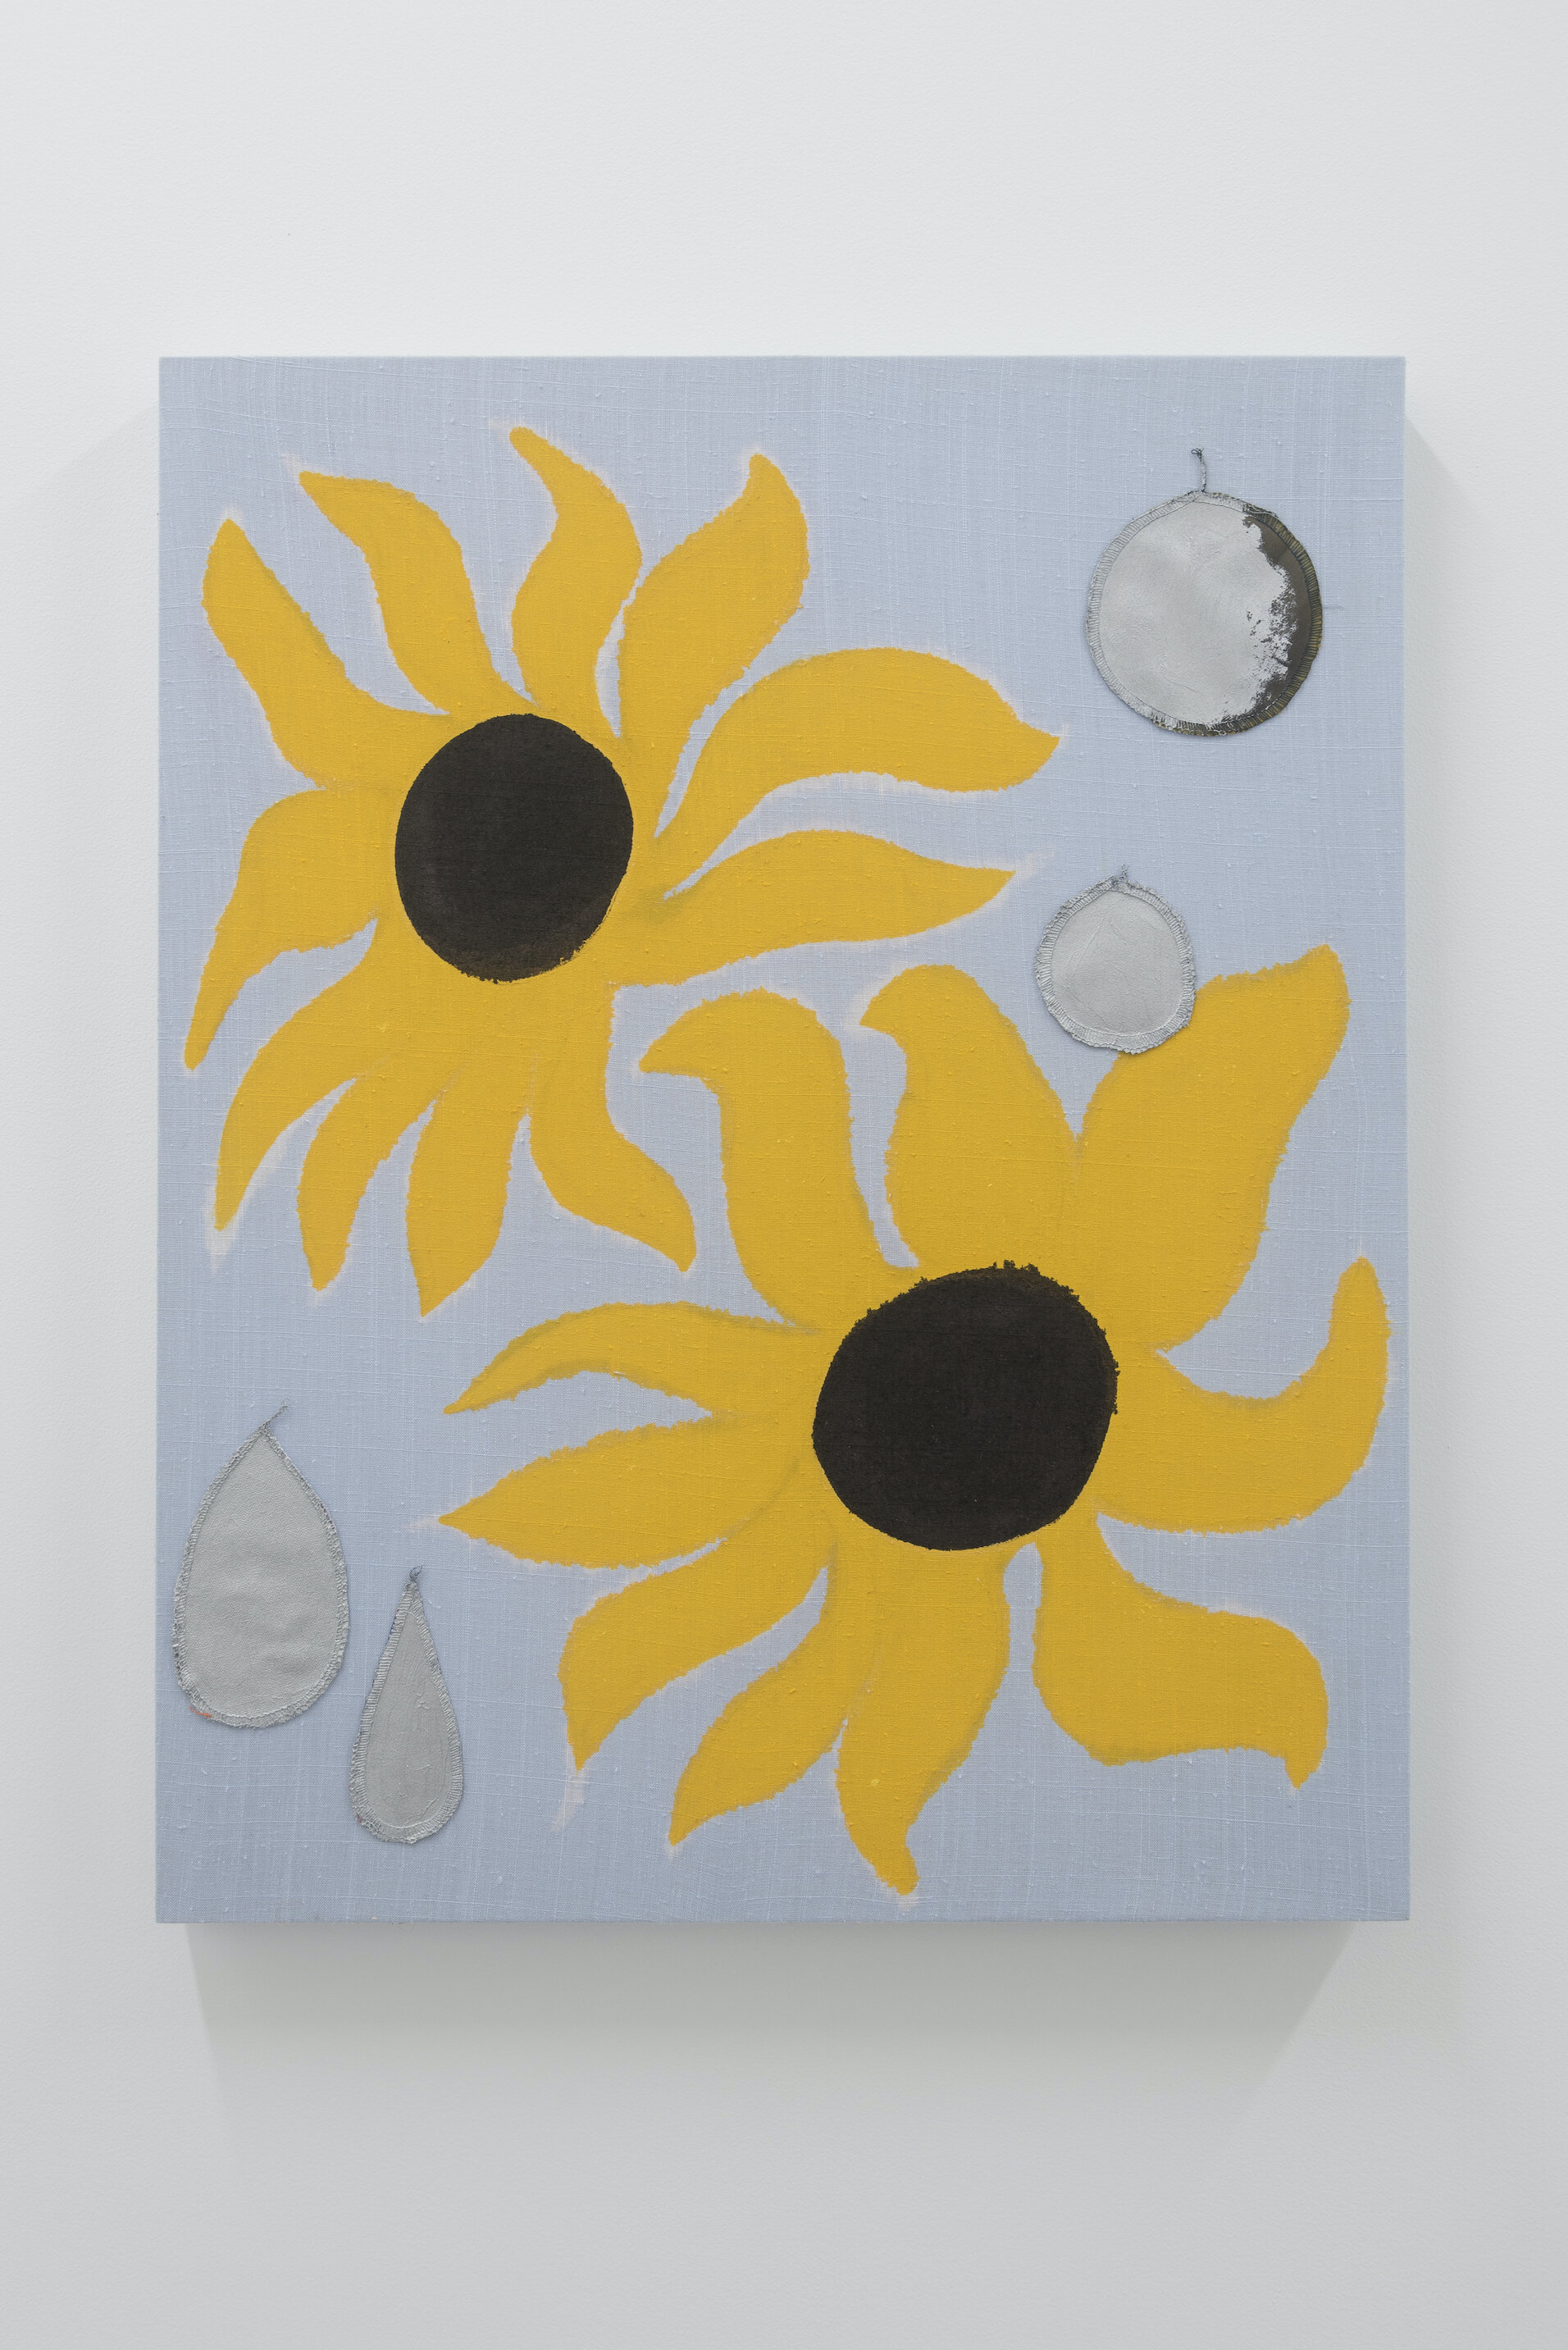  Cody Tumblin,  Yellow Blooms ​, 2019, dyed and bleached linen, dye, acrylic, painted collage, thread  